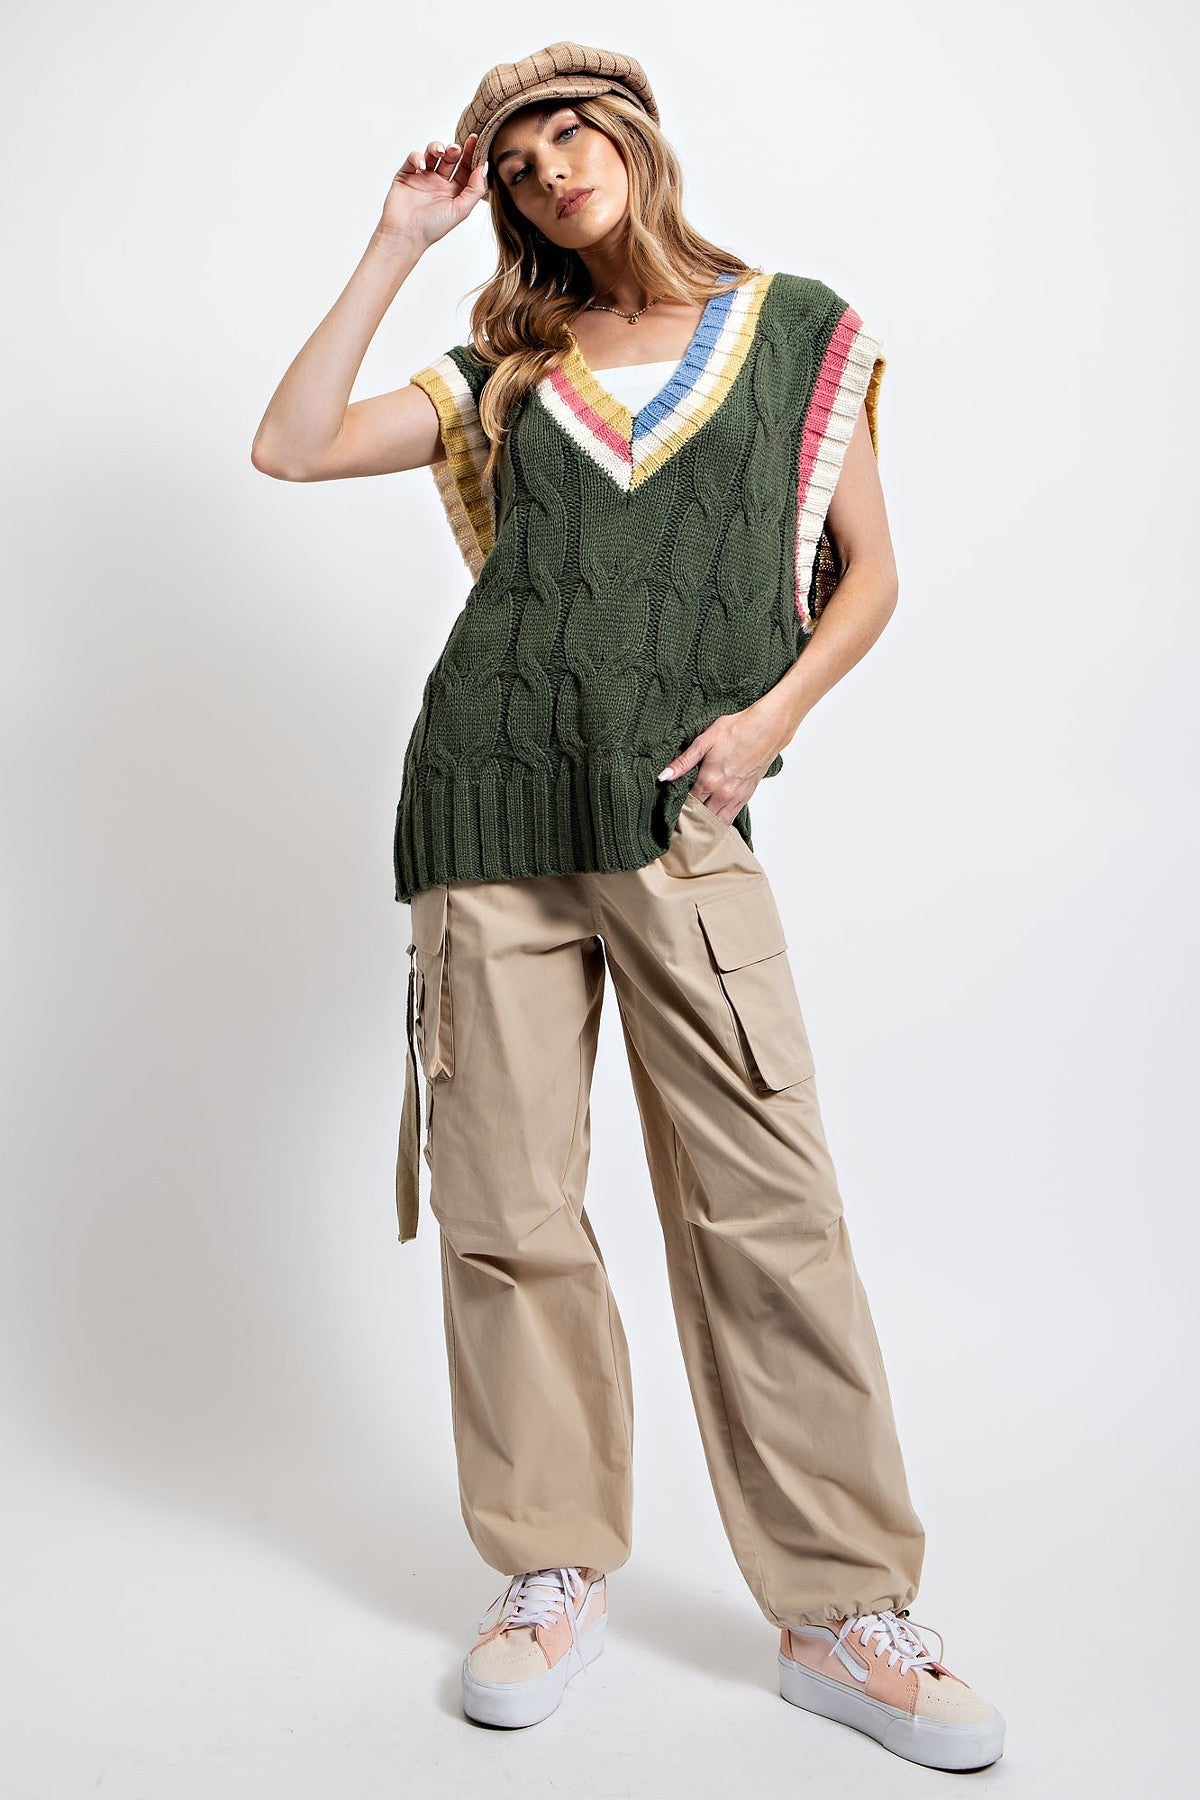 Multi Color Knitted Sweater Vest - Tigbuls Variety Fashion